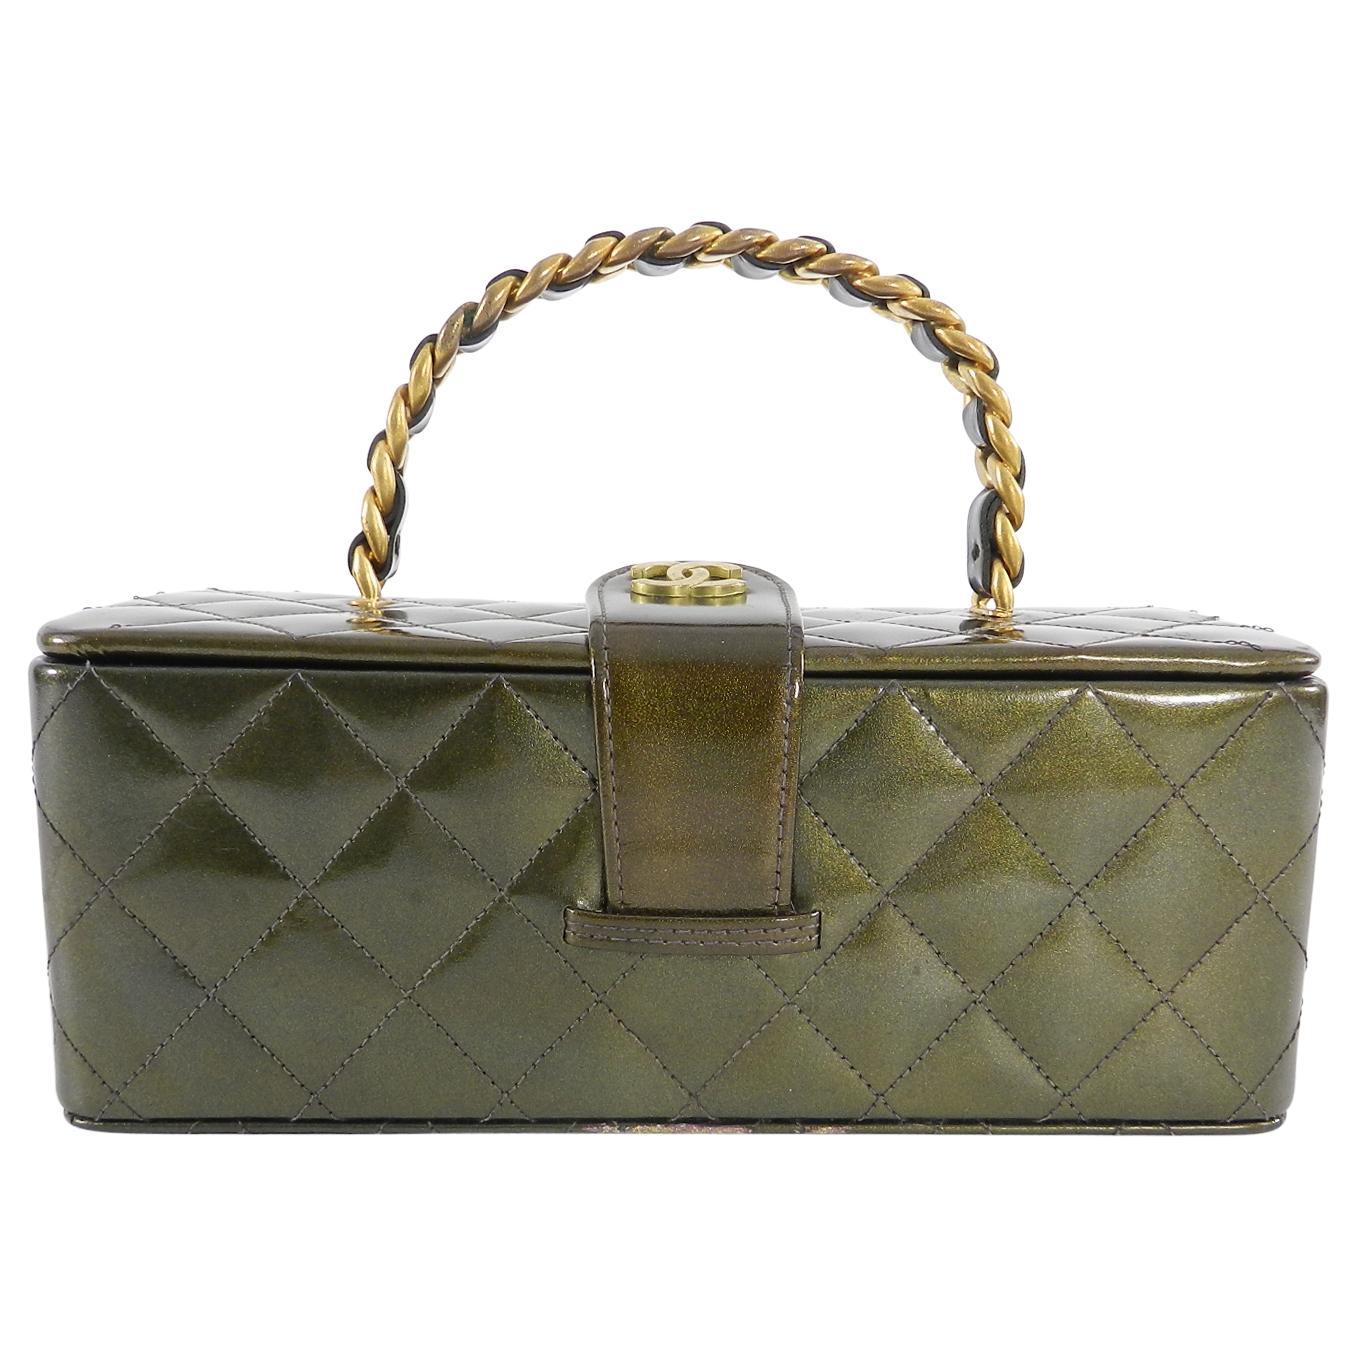 Chanel Vintage 1994 Olive Green Patent Vanity Case Bag.  True vintage limited edition box bag.  Olive green quilted patent leather body with antiqued brass rigid chain handle and CC logo snap closure.  Black leather lined interior with mirror top